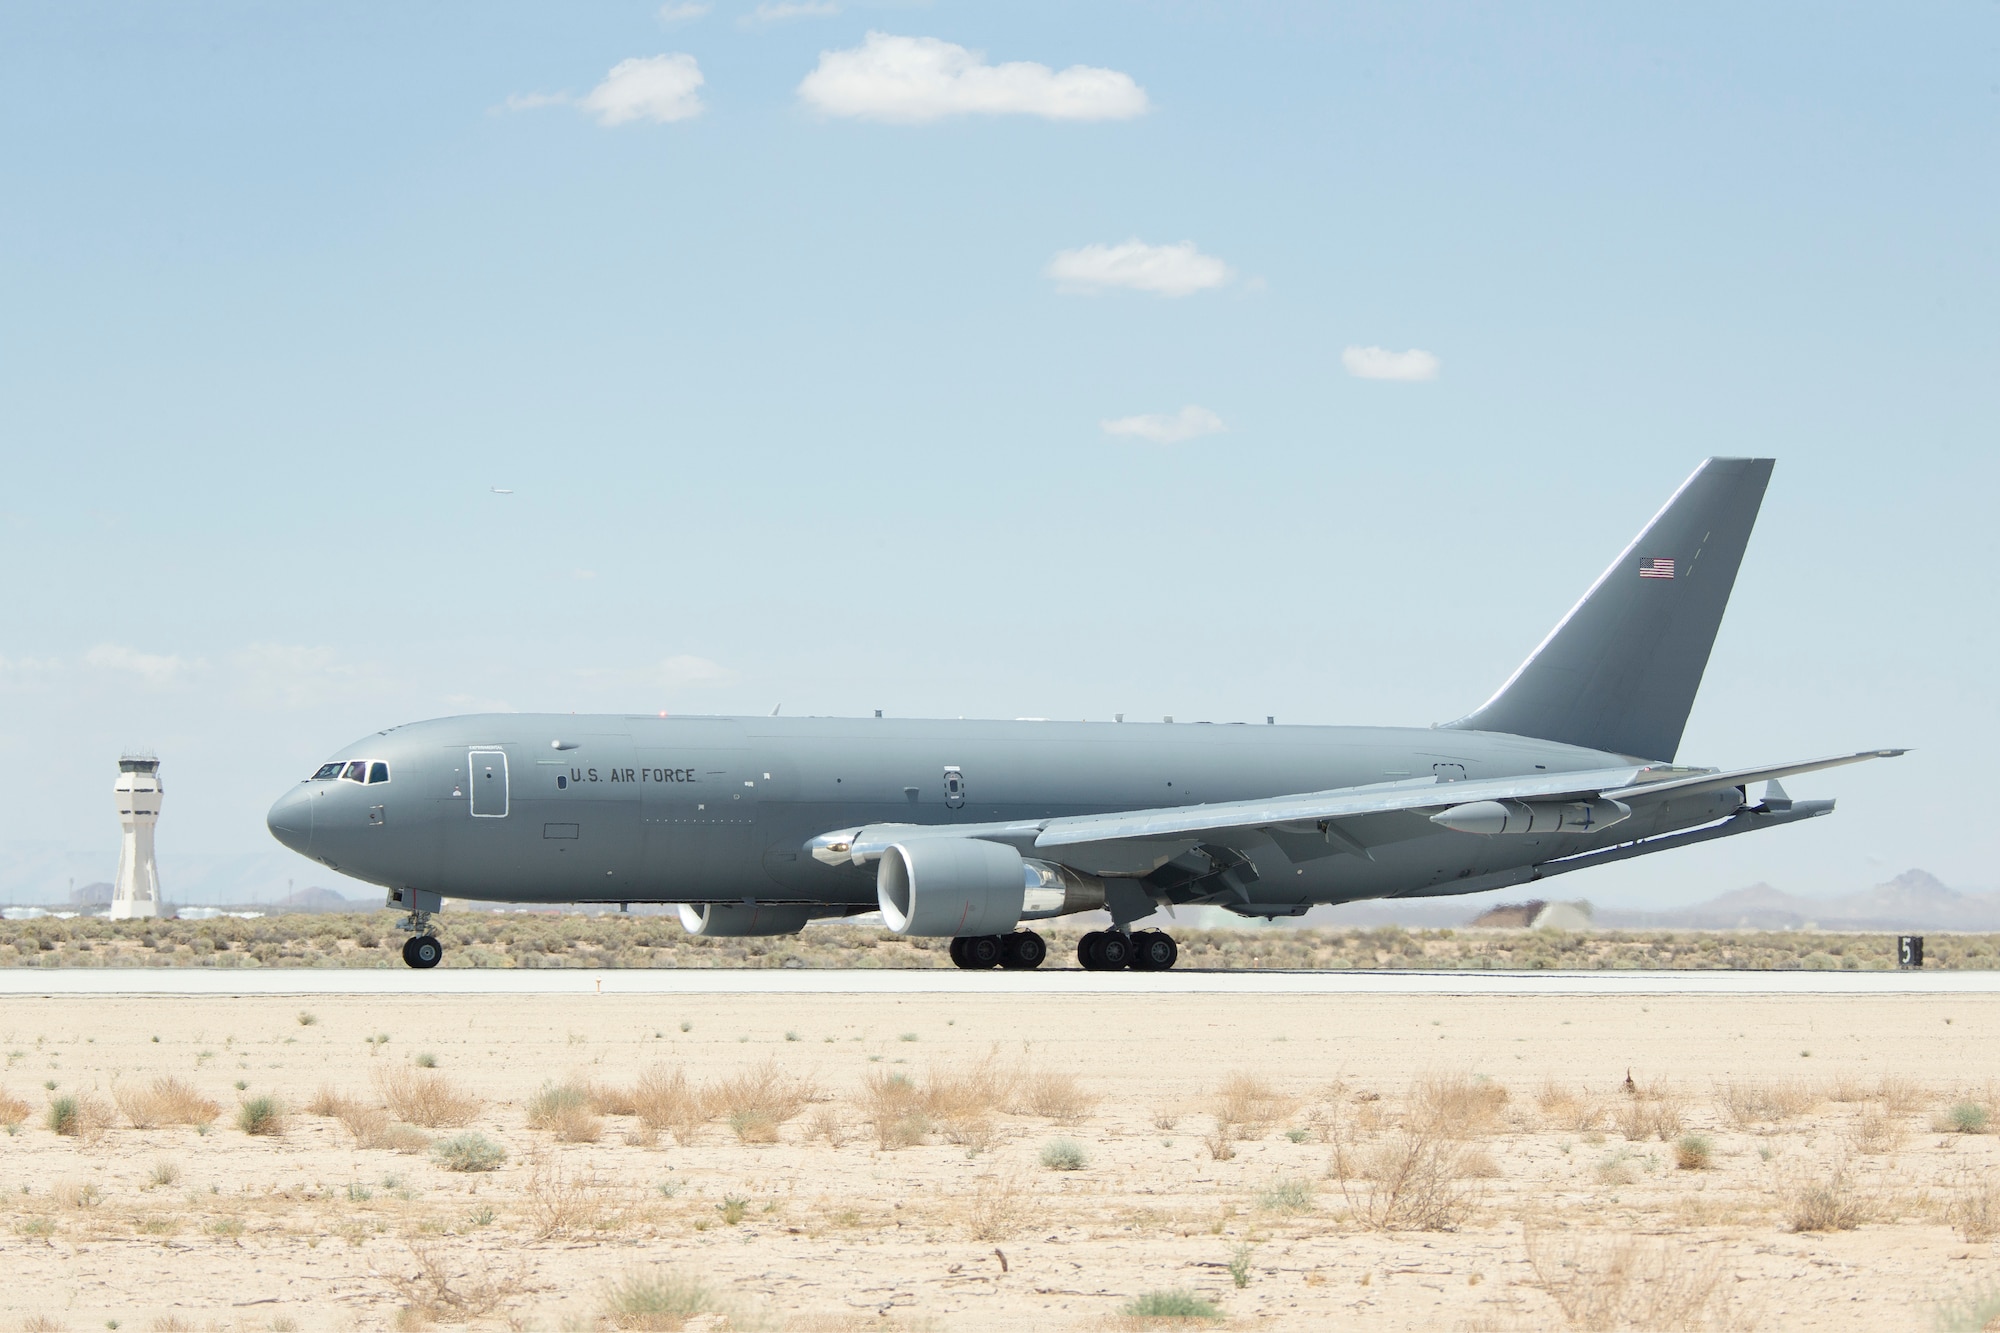 A KC-46A Pegasus aerial refueling aircraft touched down at Edwards May 23 for flight tests.